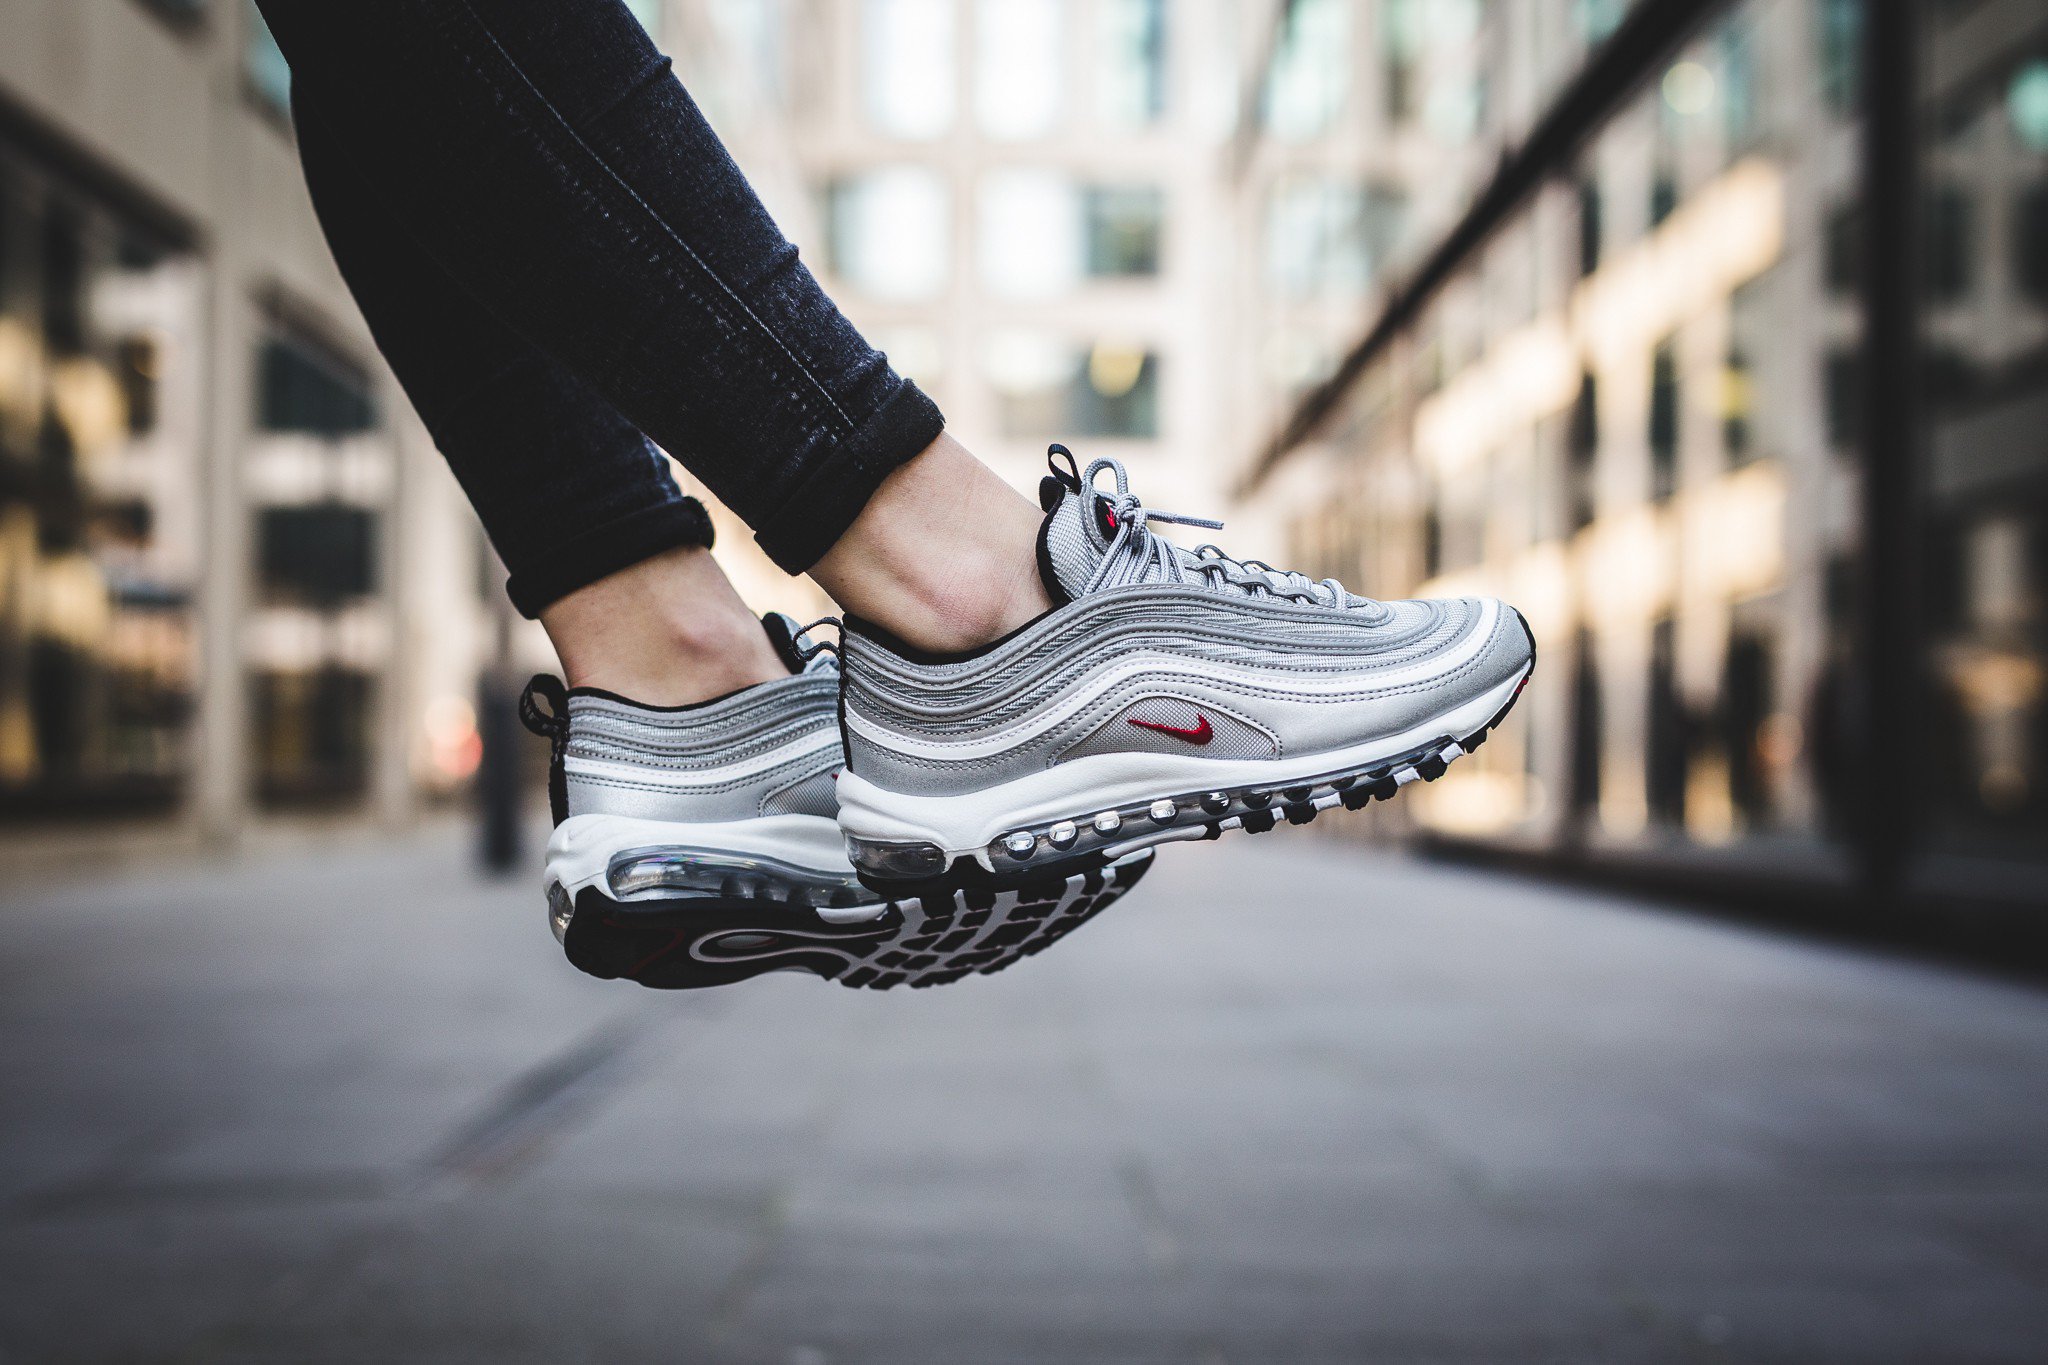 bungeejumpen mengsel een vergoeding The Sole Supplier on Twitter: "Nike Air Max 97 Womens Silver Bullet. Use  code VIPDEAL25 for 25% off at Foot Locker UK Link &gt;  https://t.co/wQCMpKYFEO https://t.co/GR7x29mrIS" / X